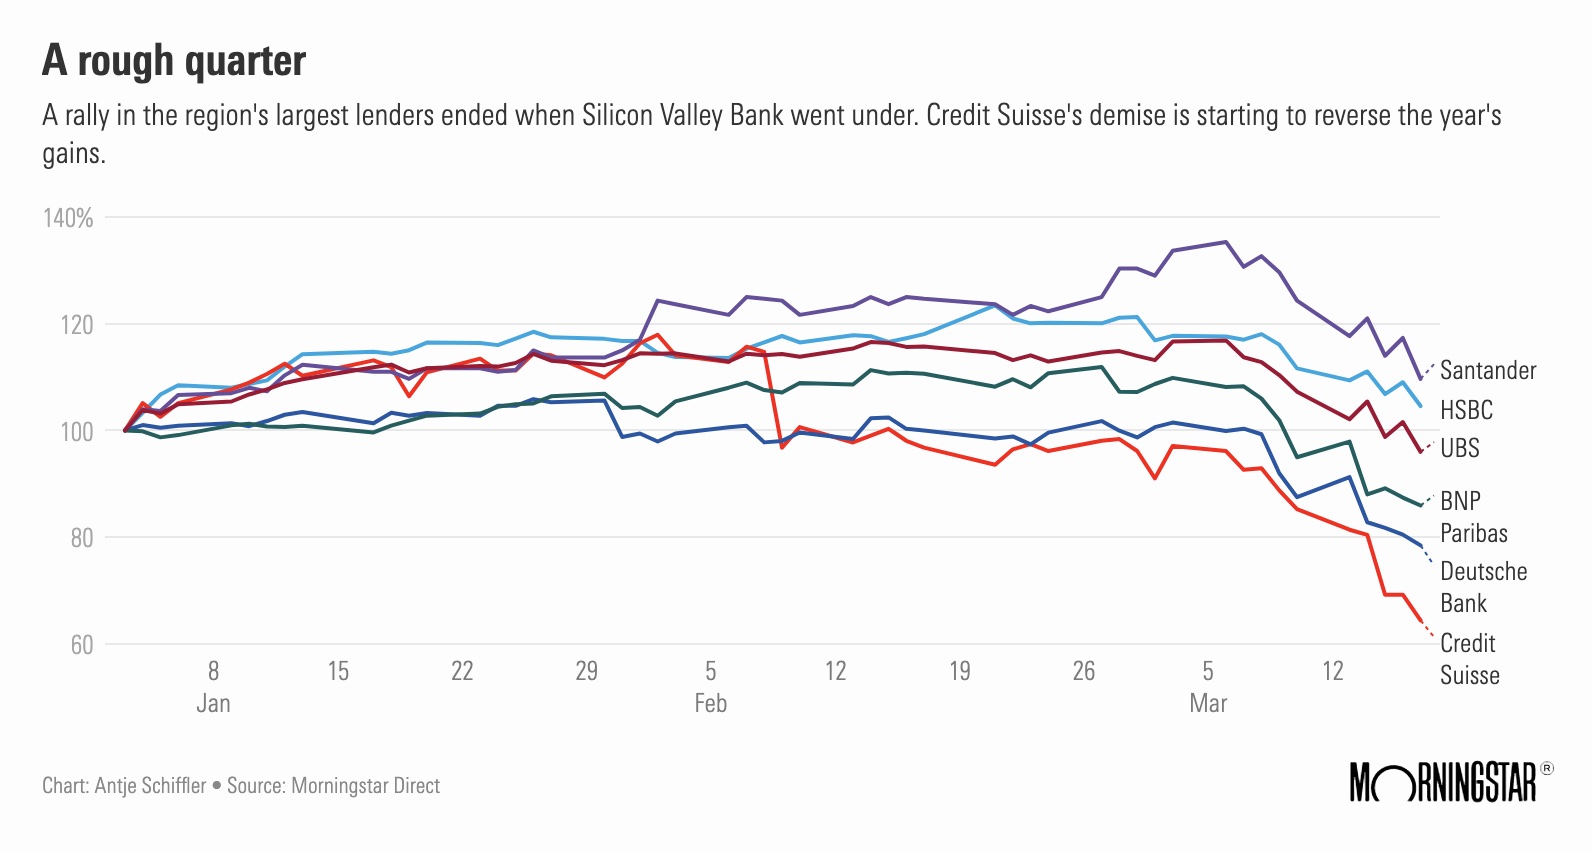 Chart showing how Credit Suisse's demise is starting to reverse the year's gains for other banks.